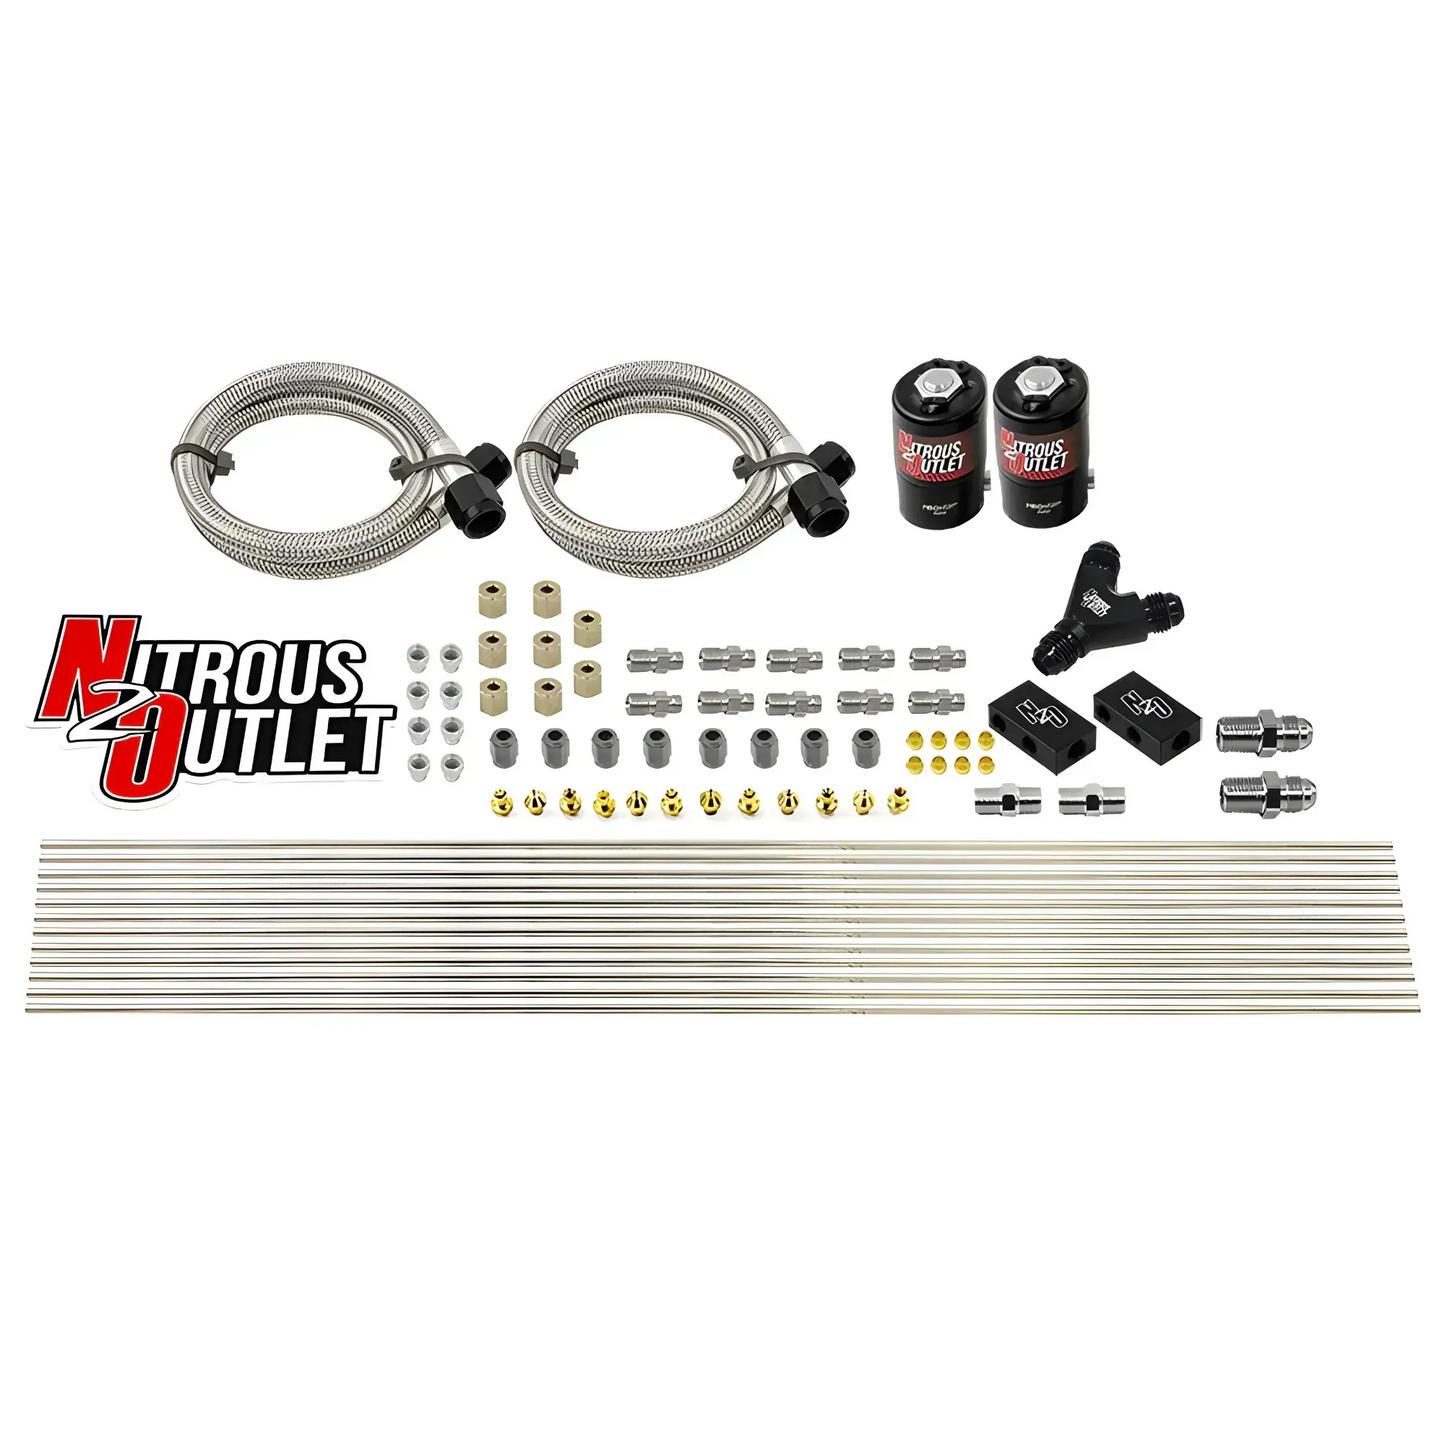 Dry 8 Cylinder Solenoid Forward Direct Port Conversion Kit - .112" Orifice - Distribution Blocks - Compression Fittings